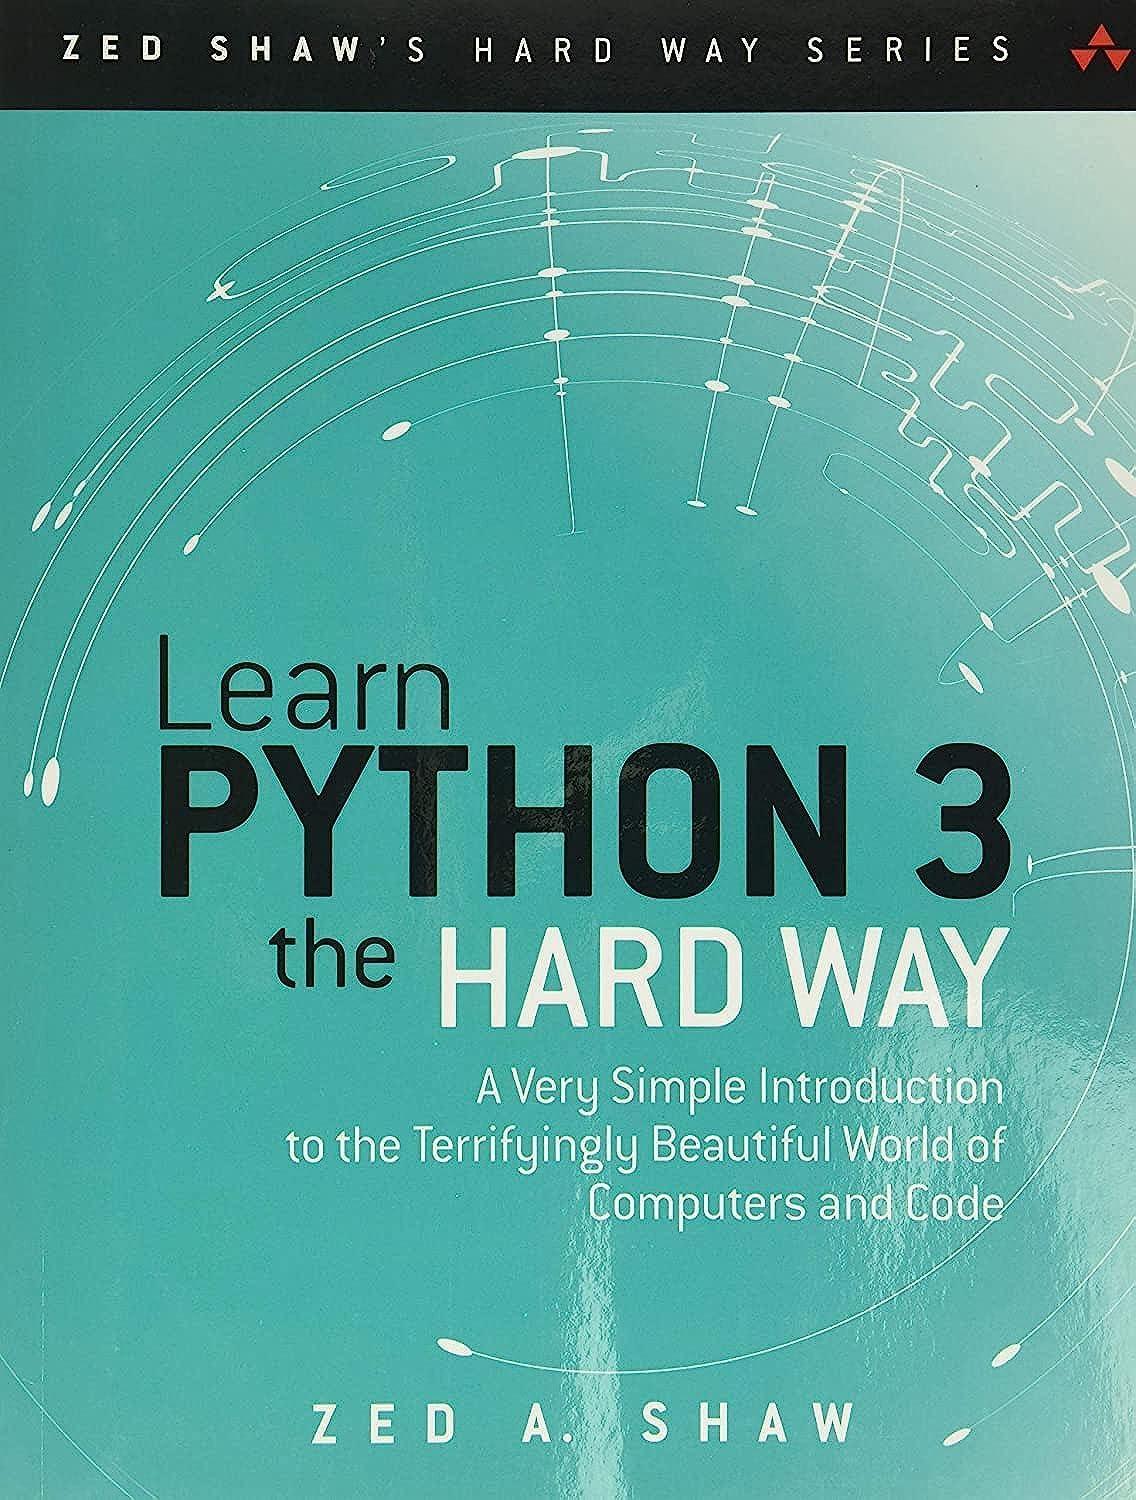 learn python 3 the hard way a very simple introduction to the terrifyingly beautiful world of computers and